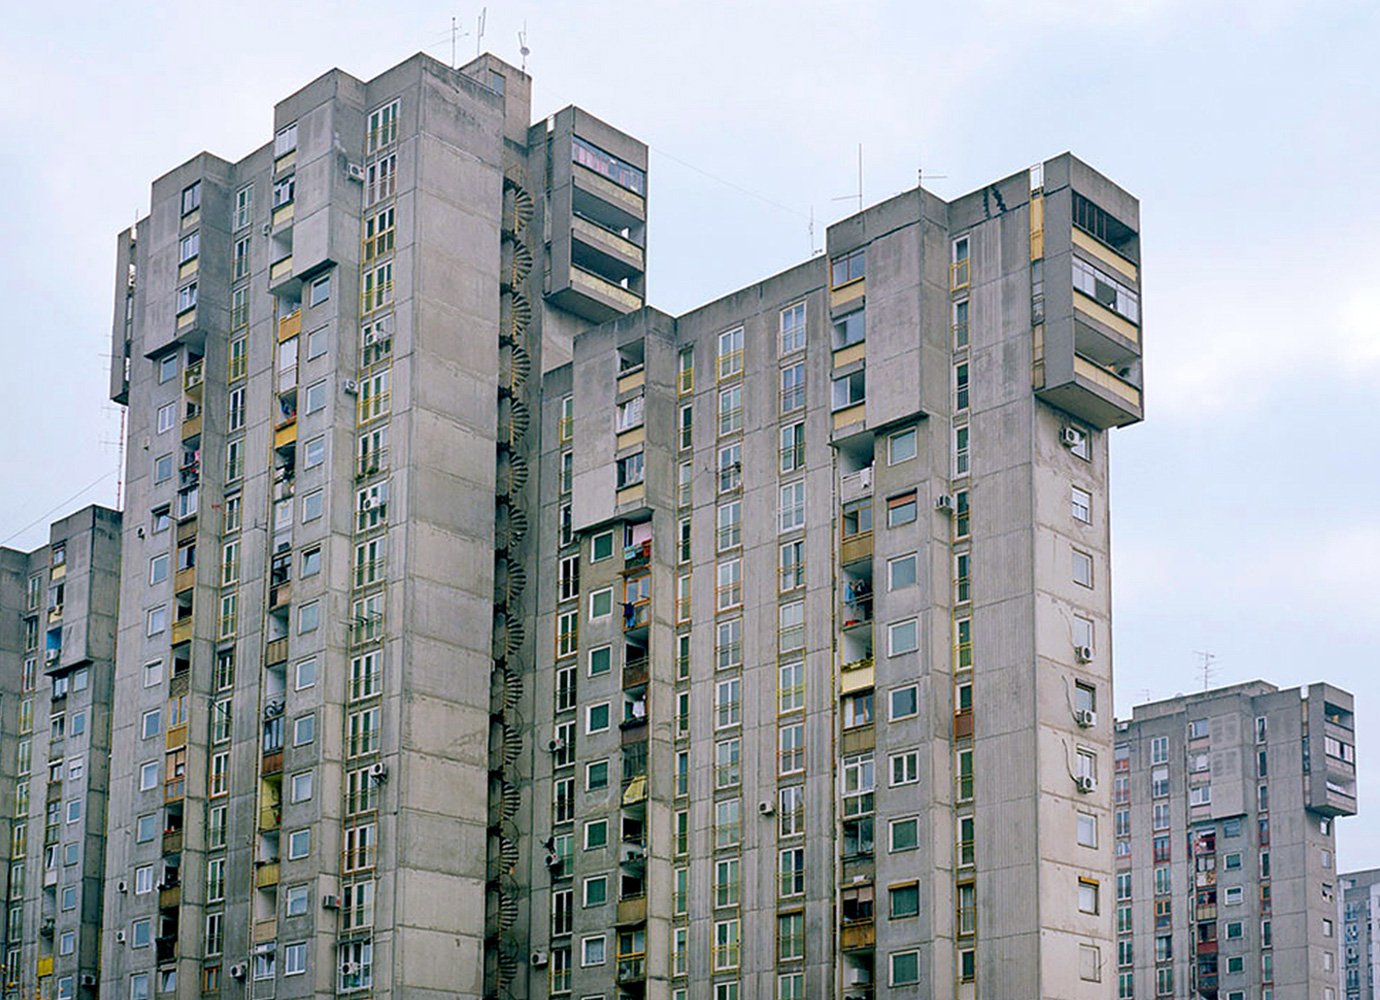 Post-Soviet city: a special report on the photography of the former eastern bloc